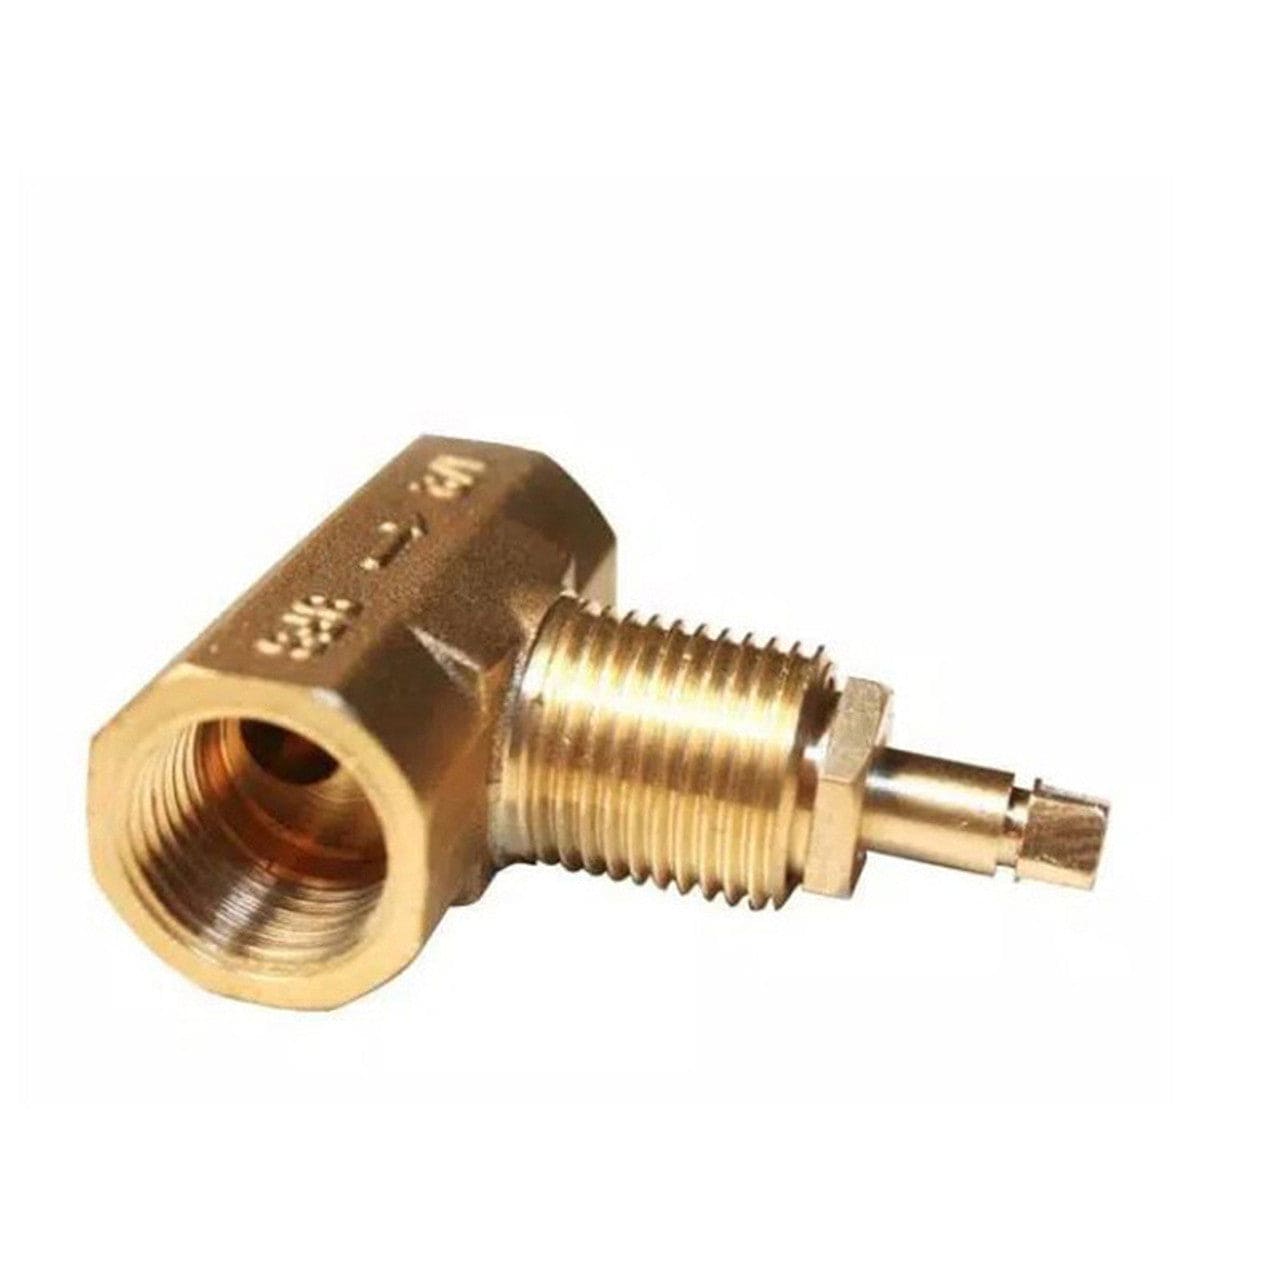 Straight Gas Multi-Turn Valve For Ng Or Lp - BFS.910 - Chimney Cricket